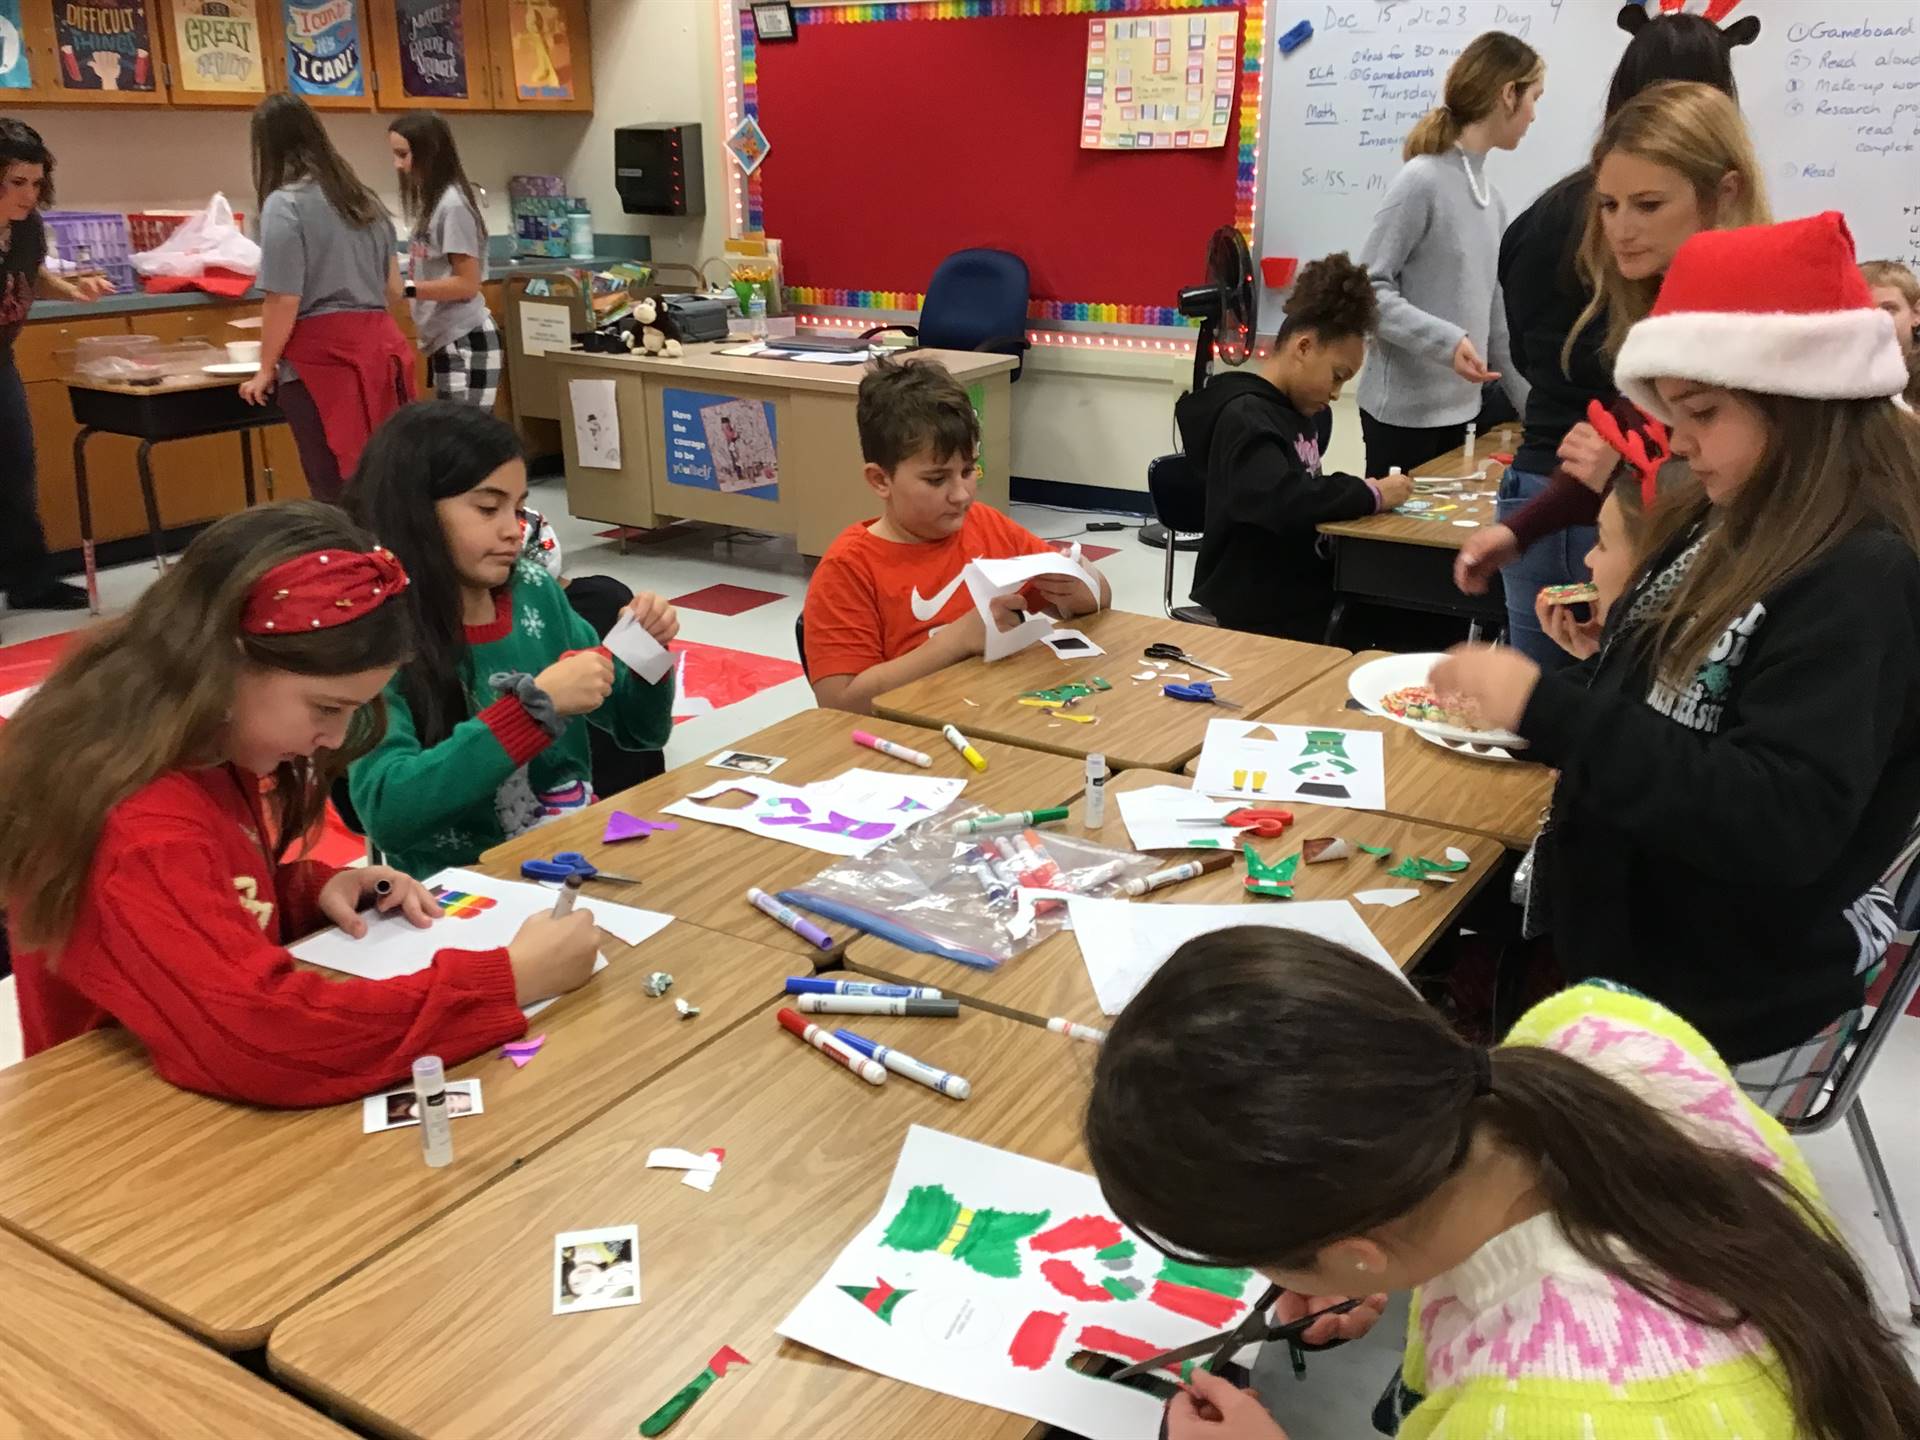 Students cutting paper for craft at holiday party